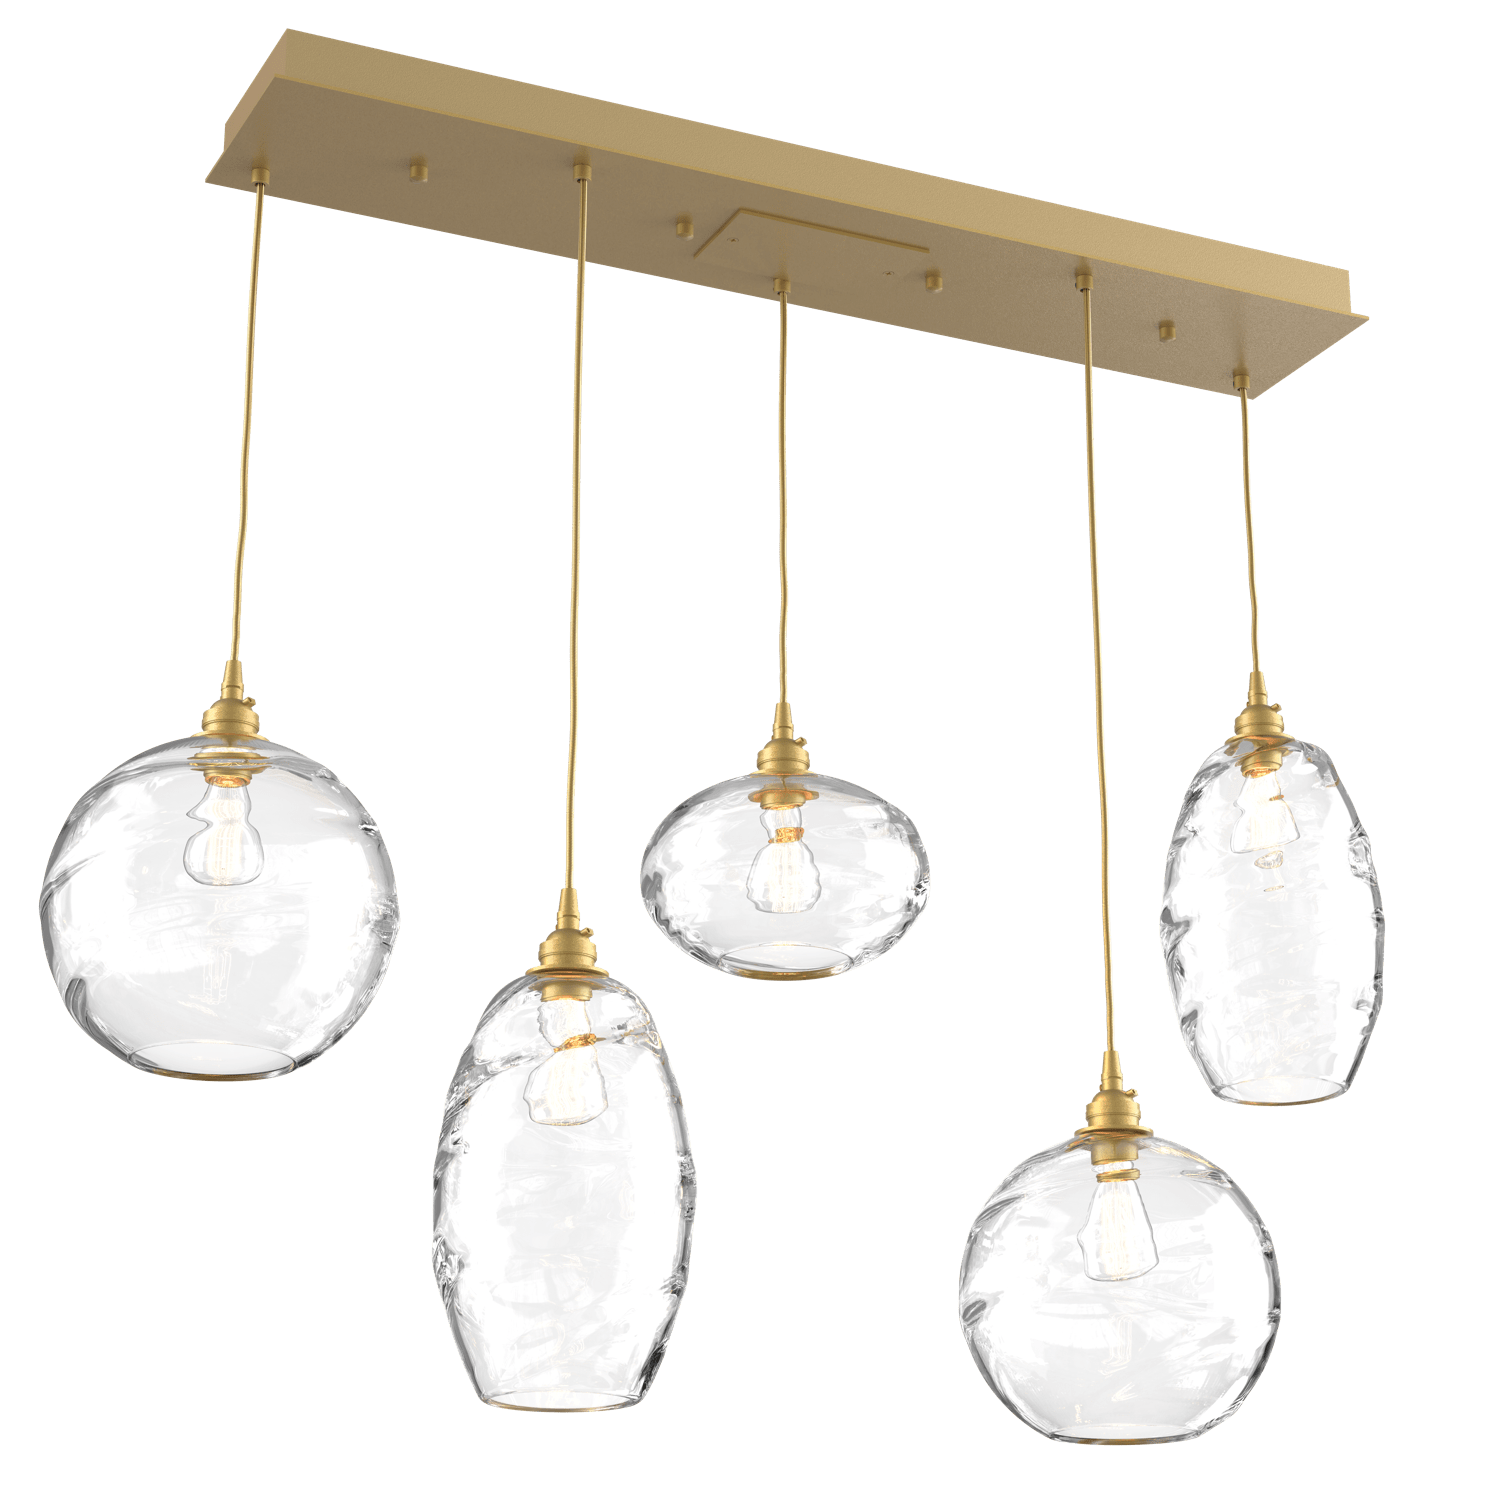 PLB0048-05-GB-OC-Hammerton-Studio-Optic-Blown-Glass-Misto-5-light-linear-pendant-chandelier-with-gilded-brass-finish-and-optic-clear-blown-glass-shades-and-incandescent-lamping